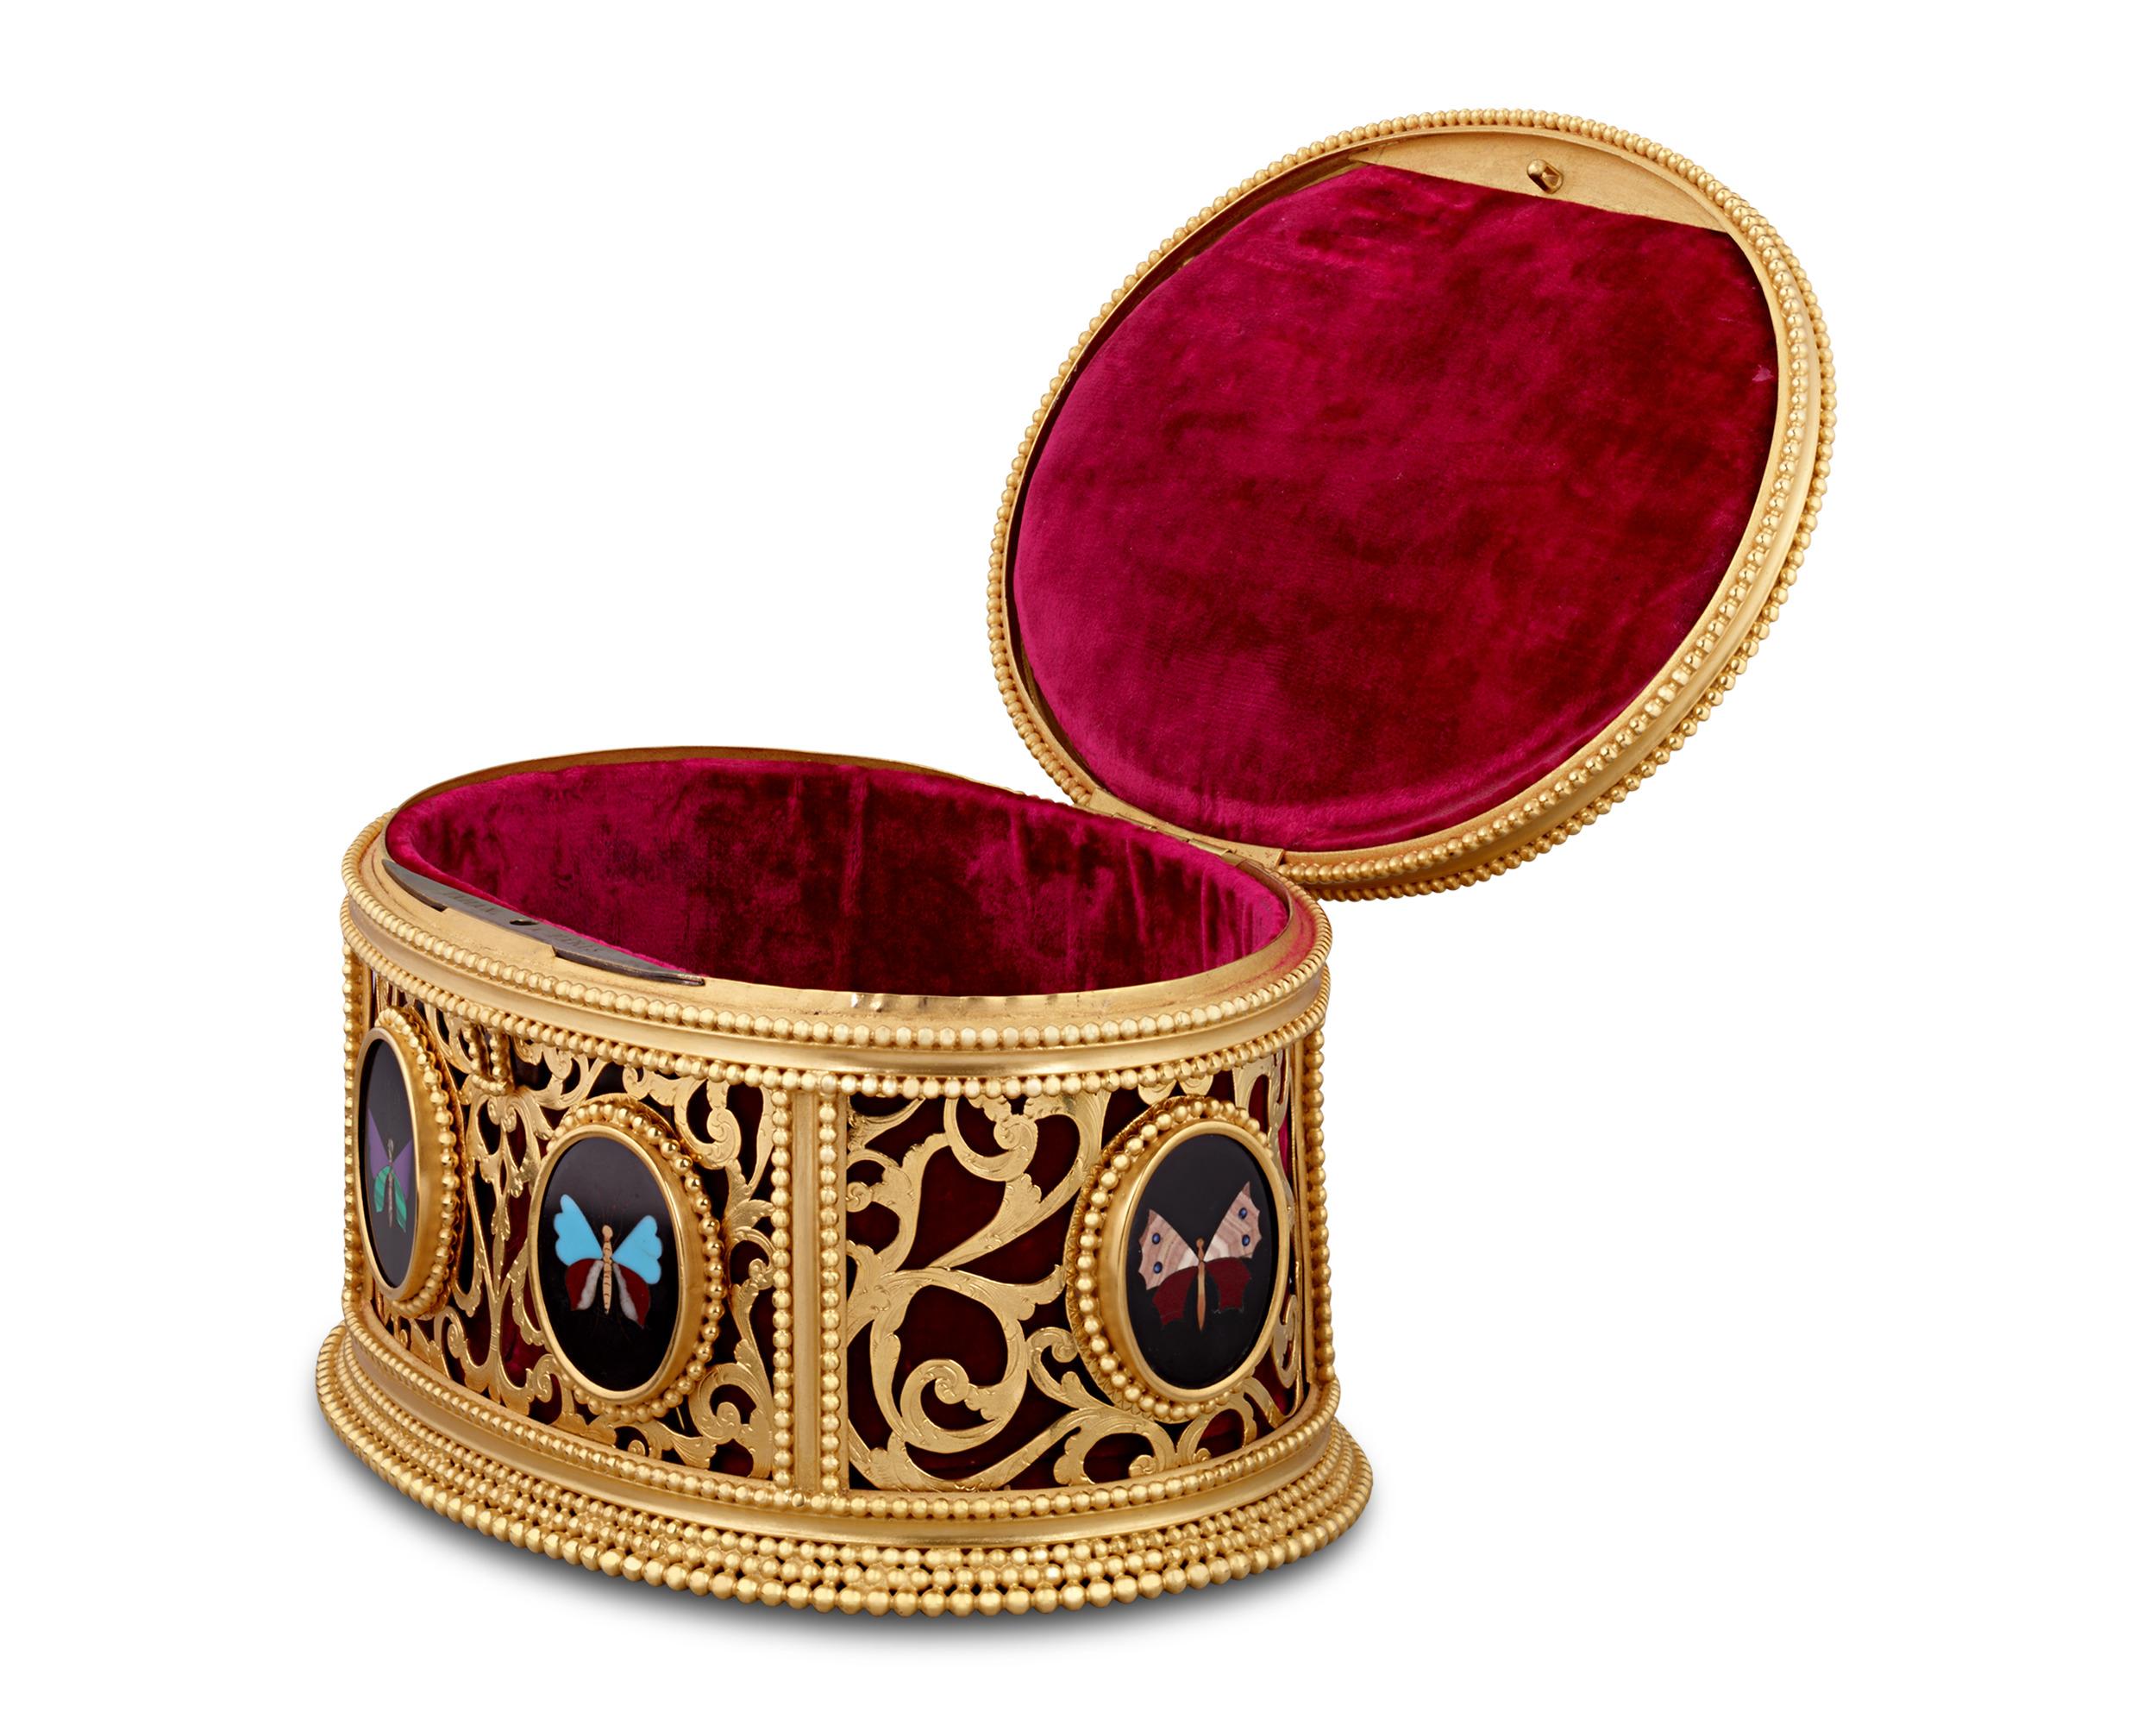 Crafted by Jean-Pierre-Alexandre Tahan, the esteemed cabinetmaker to Napoléon III, this jewelry box is a remarkable example of 19th-century European artistry. The box, shaped in doré bronze, displays a rocaille design characterized by golden,